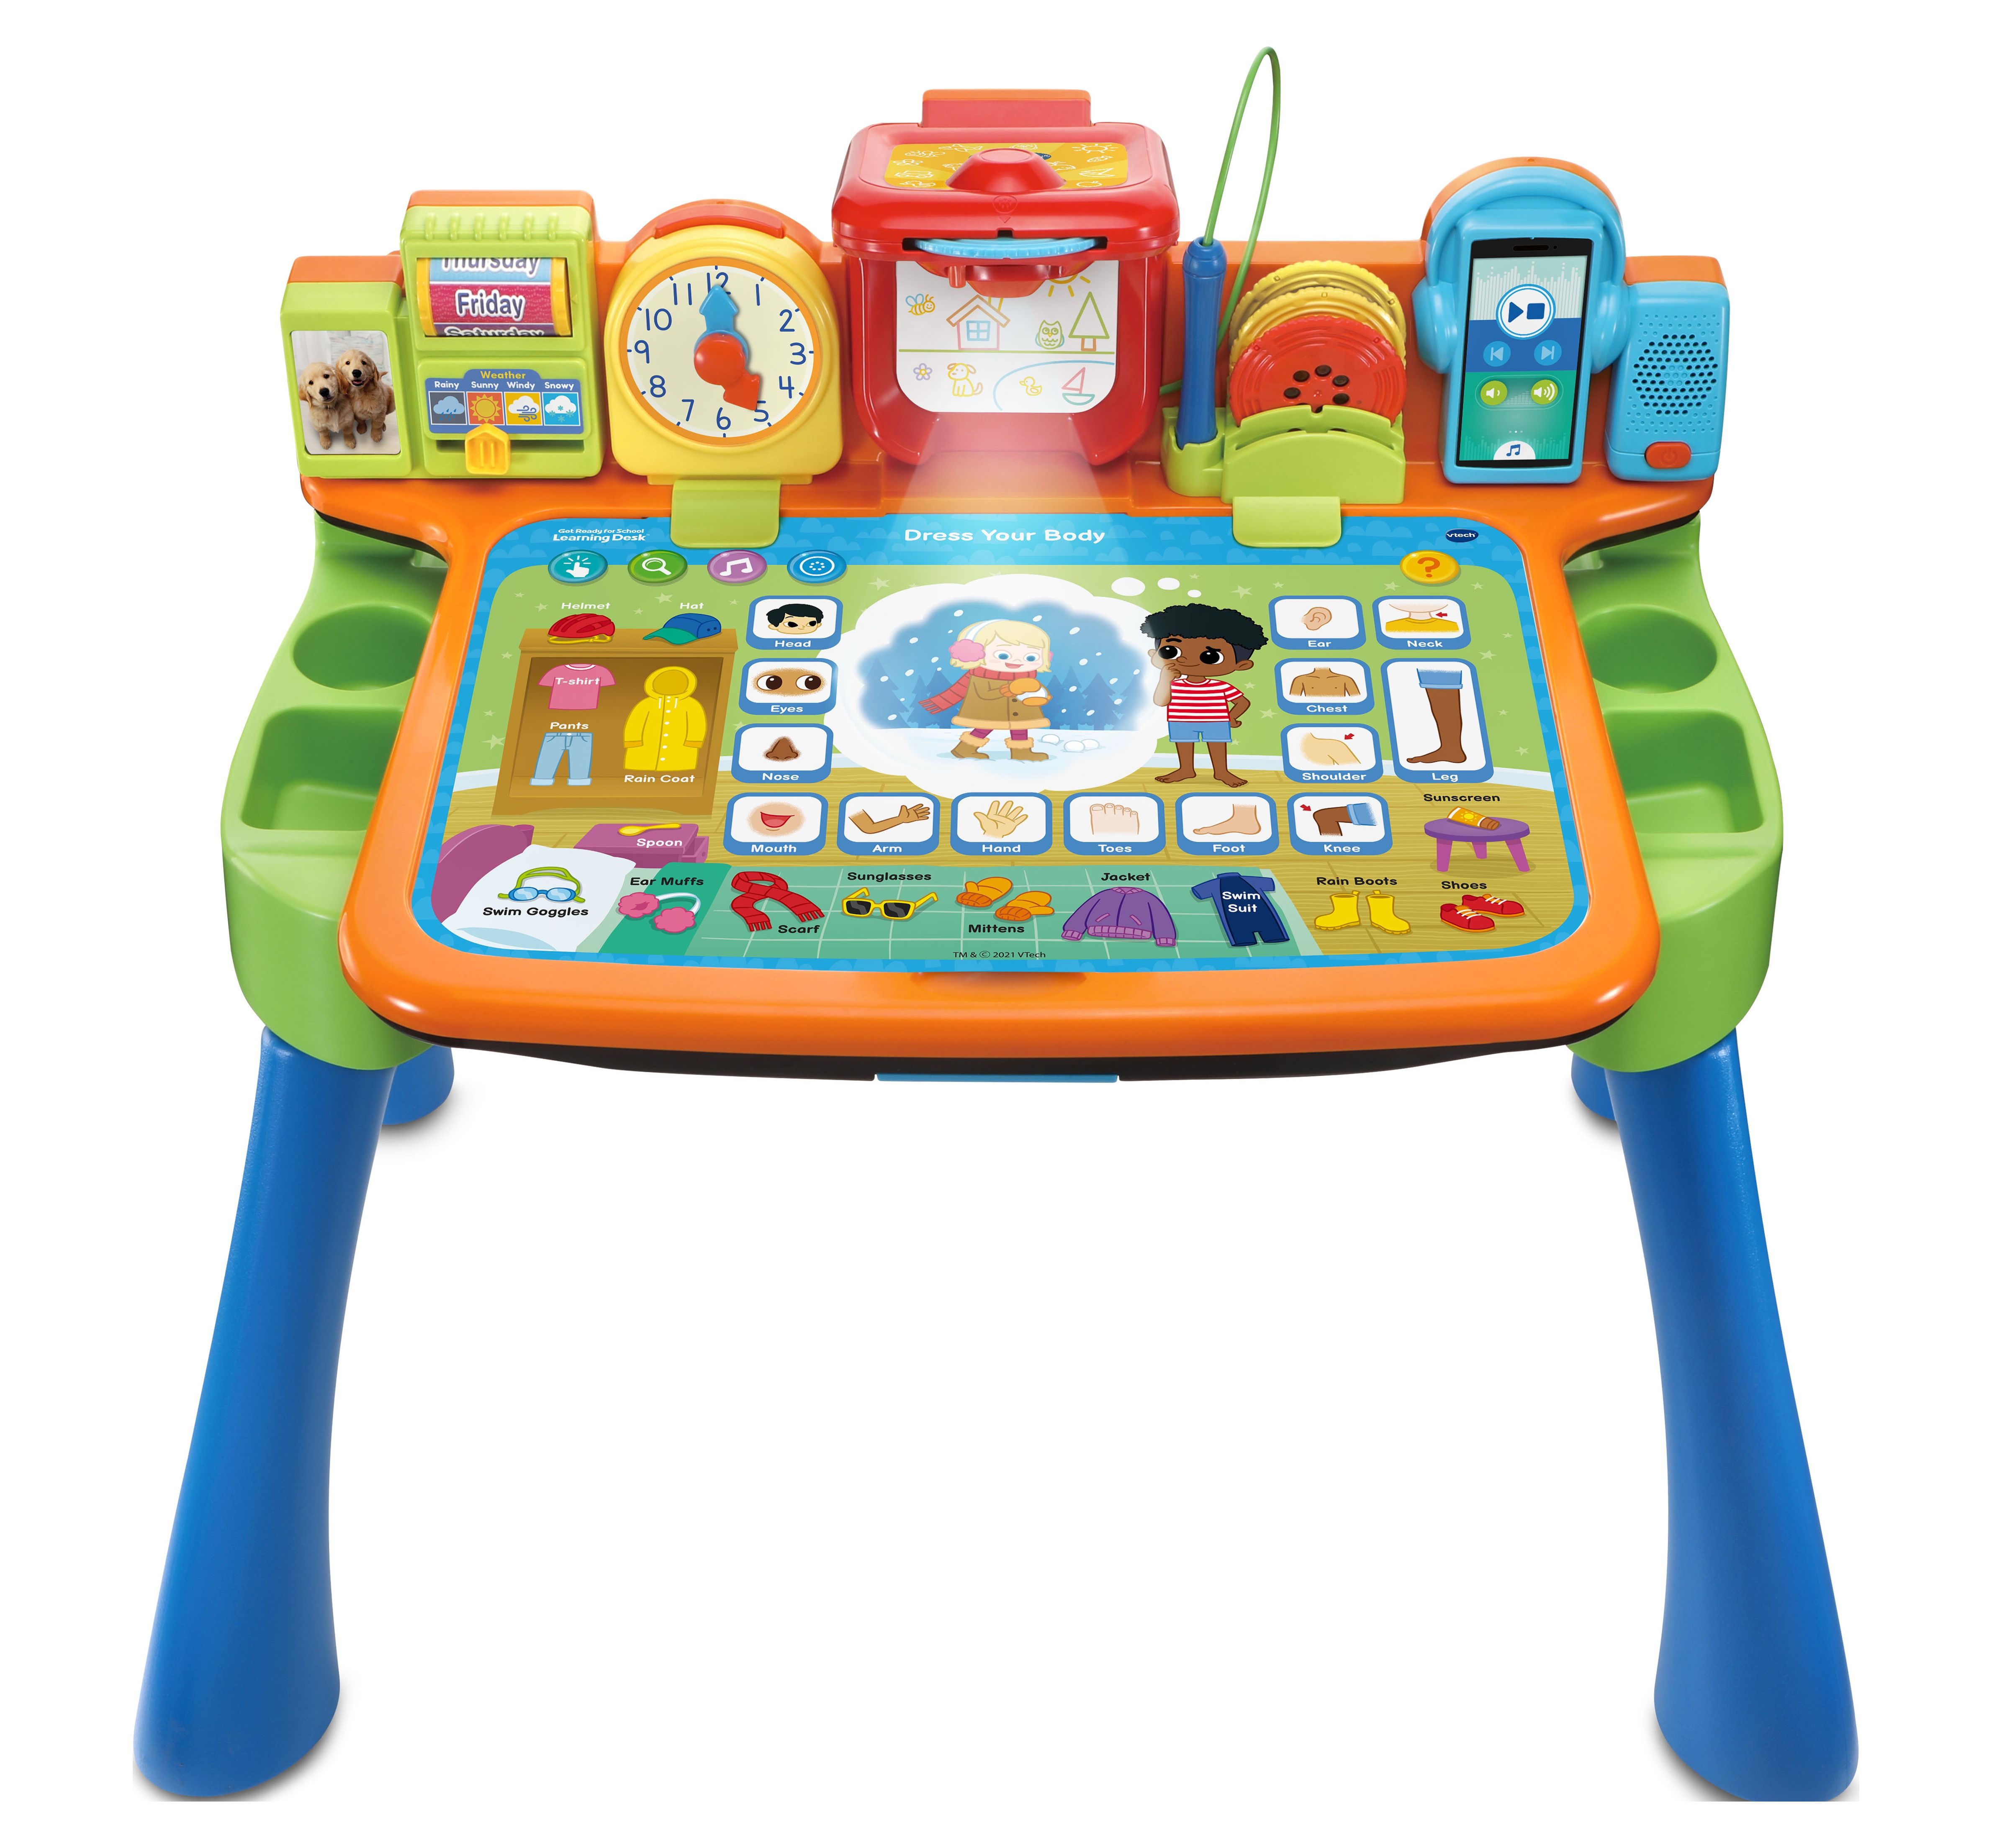 Get Ready For School Learning Desk - image 1 of 12